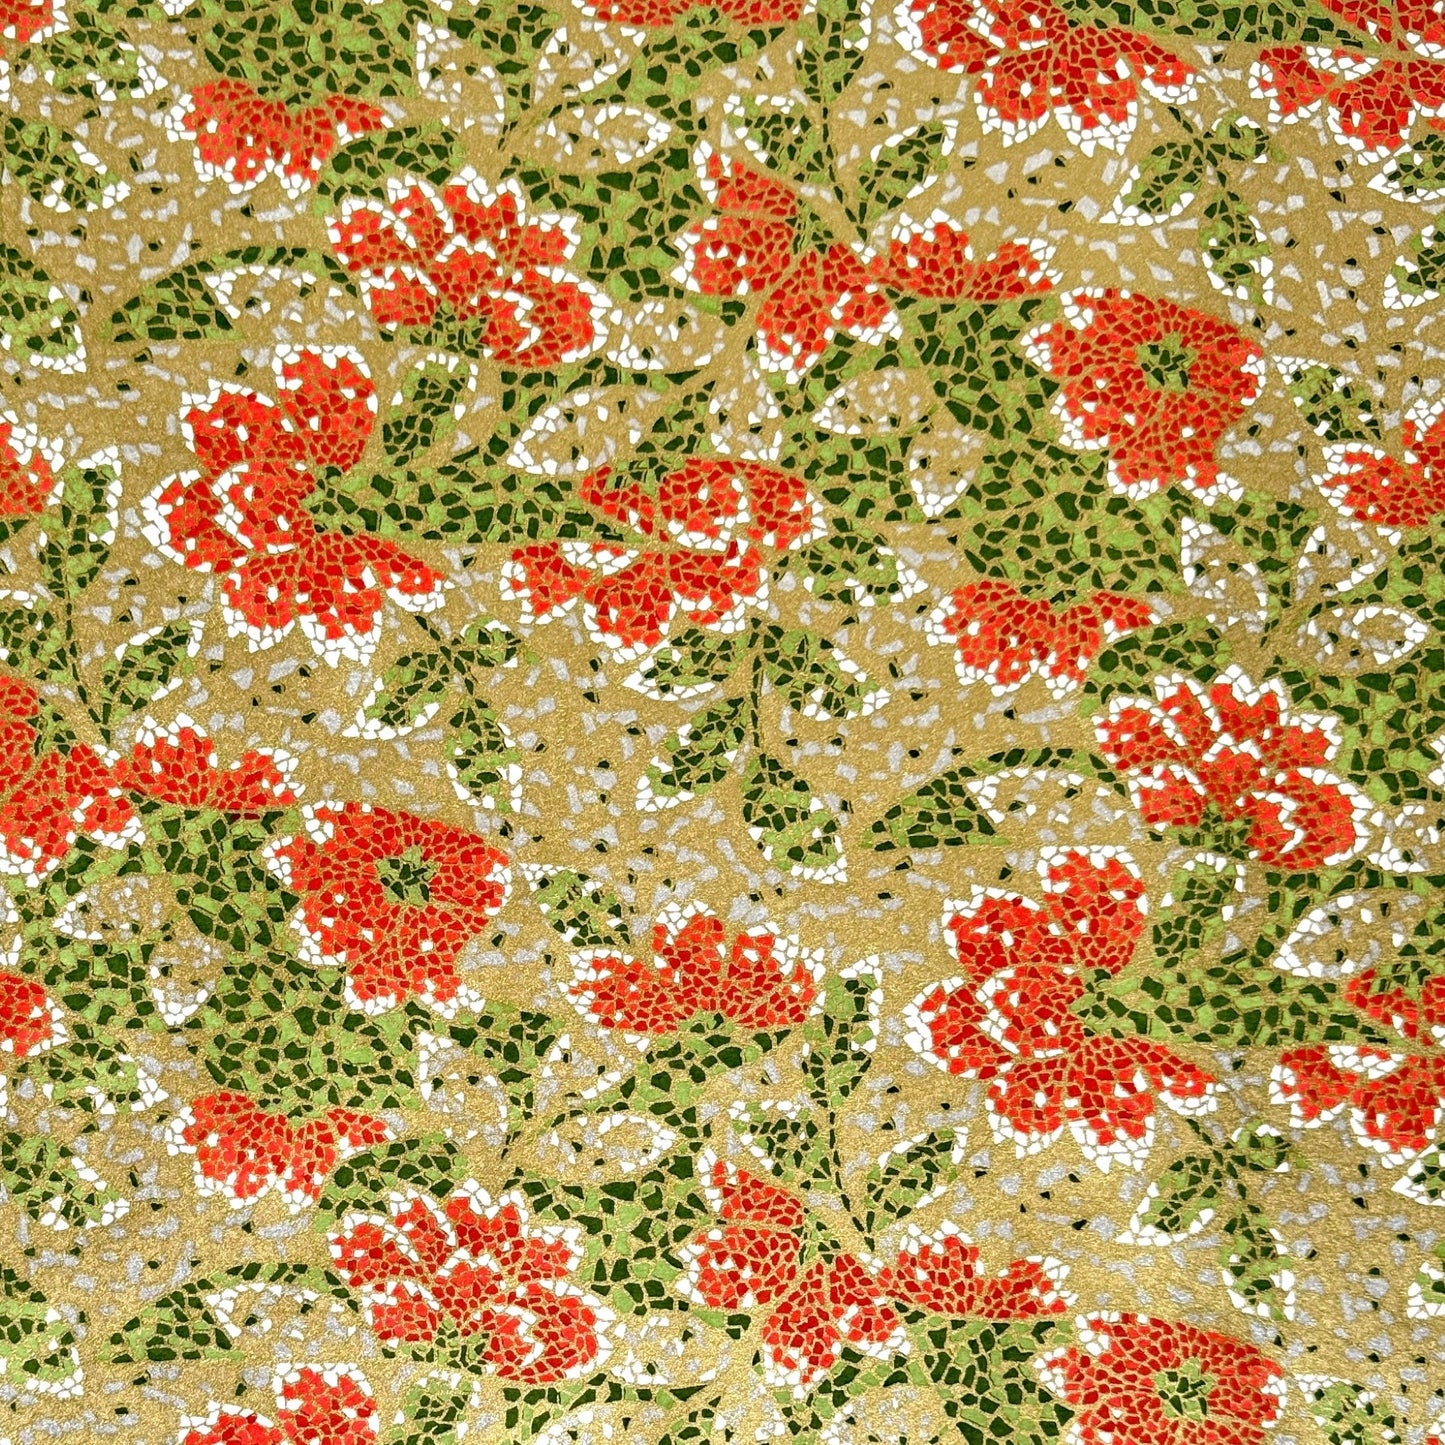 Japanese silkscreen chiyogami paper with a mosaic pattern of scarlet chrysanthemums on gold with green foliage.